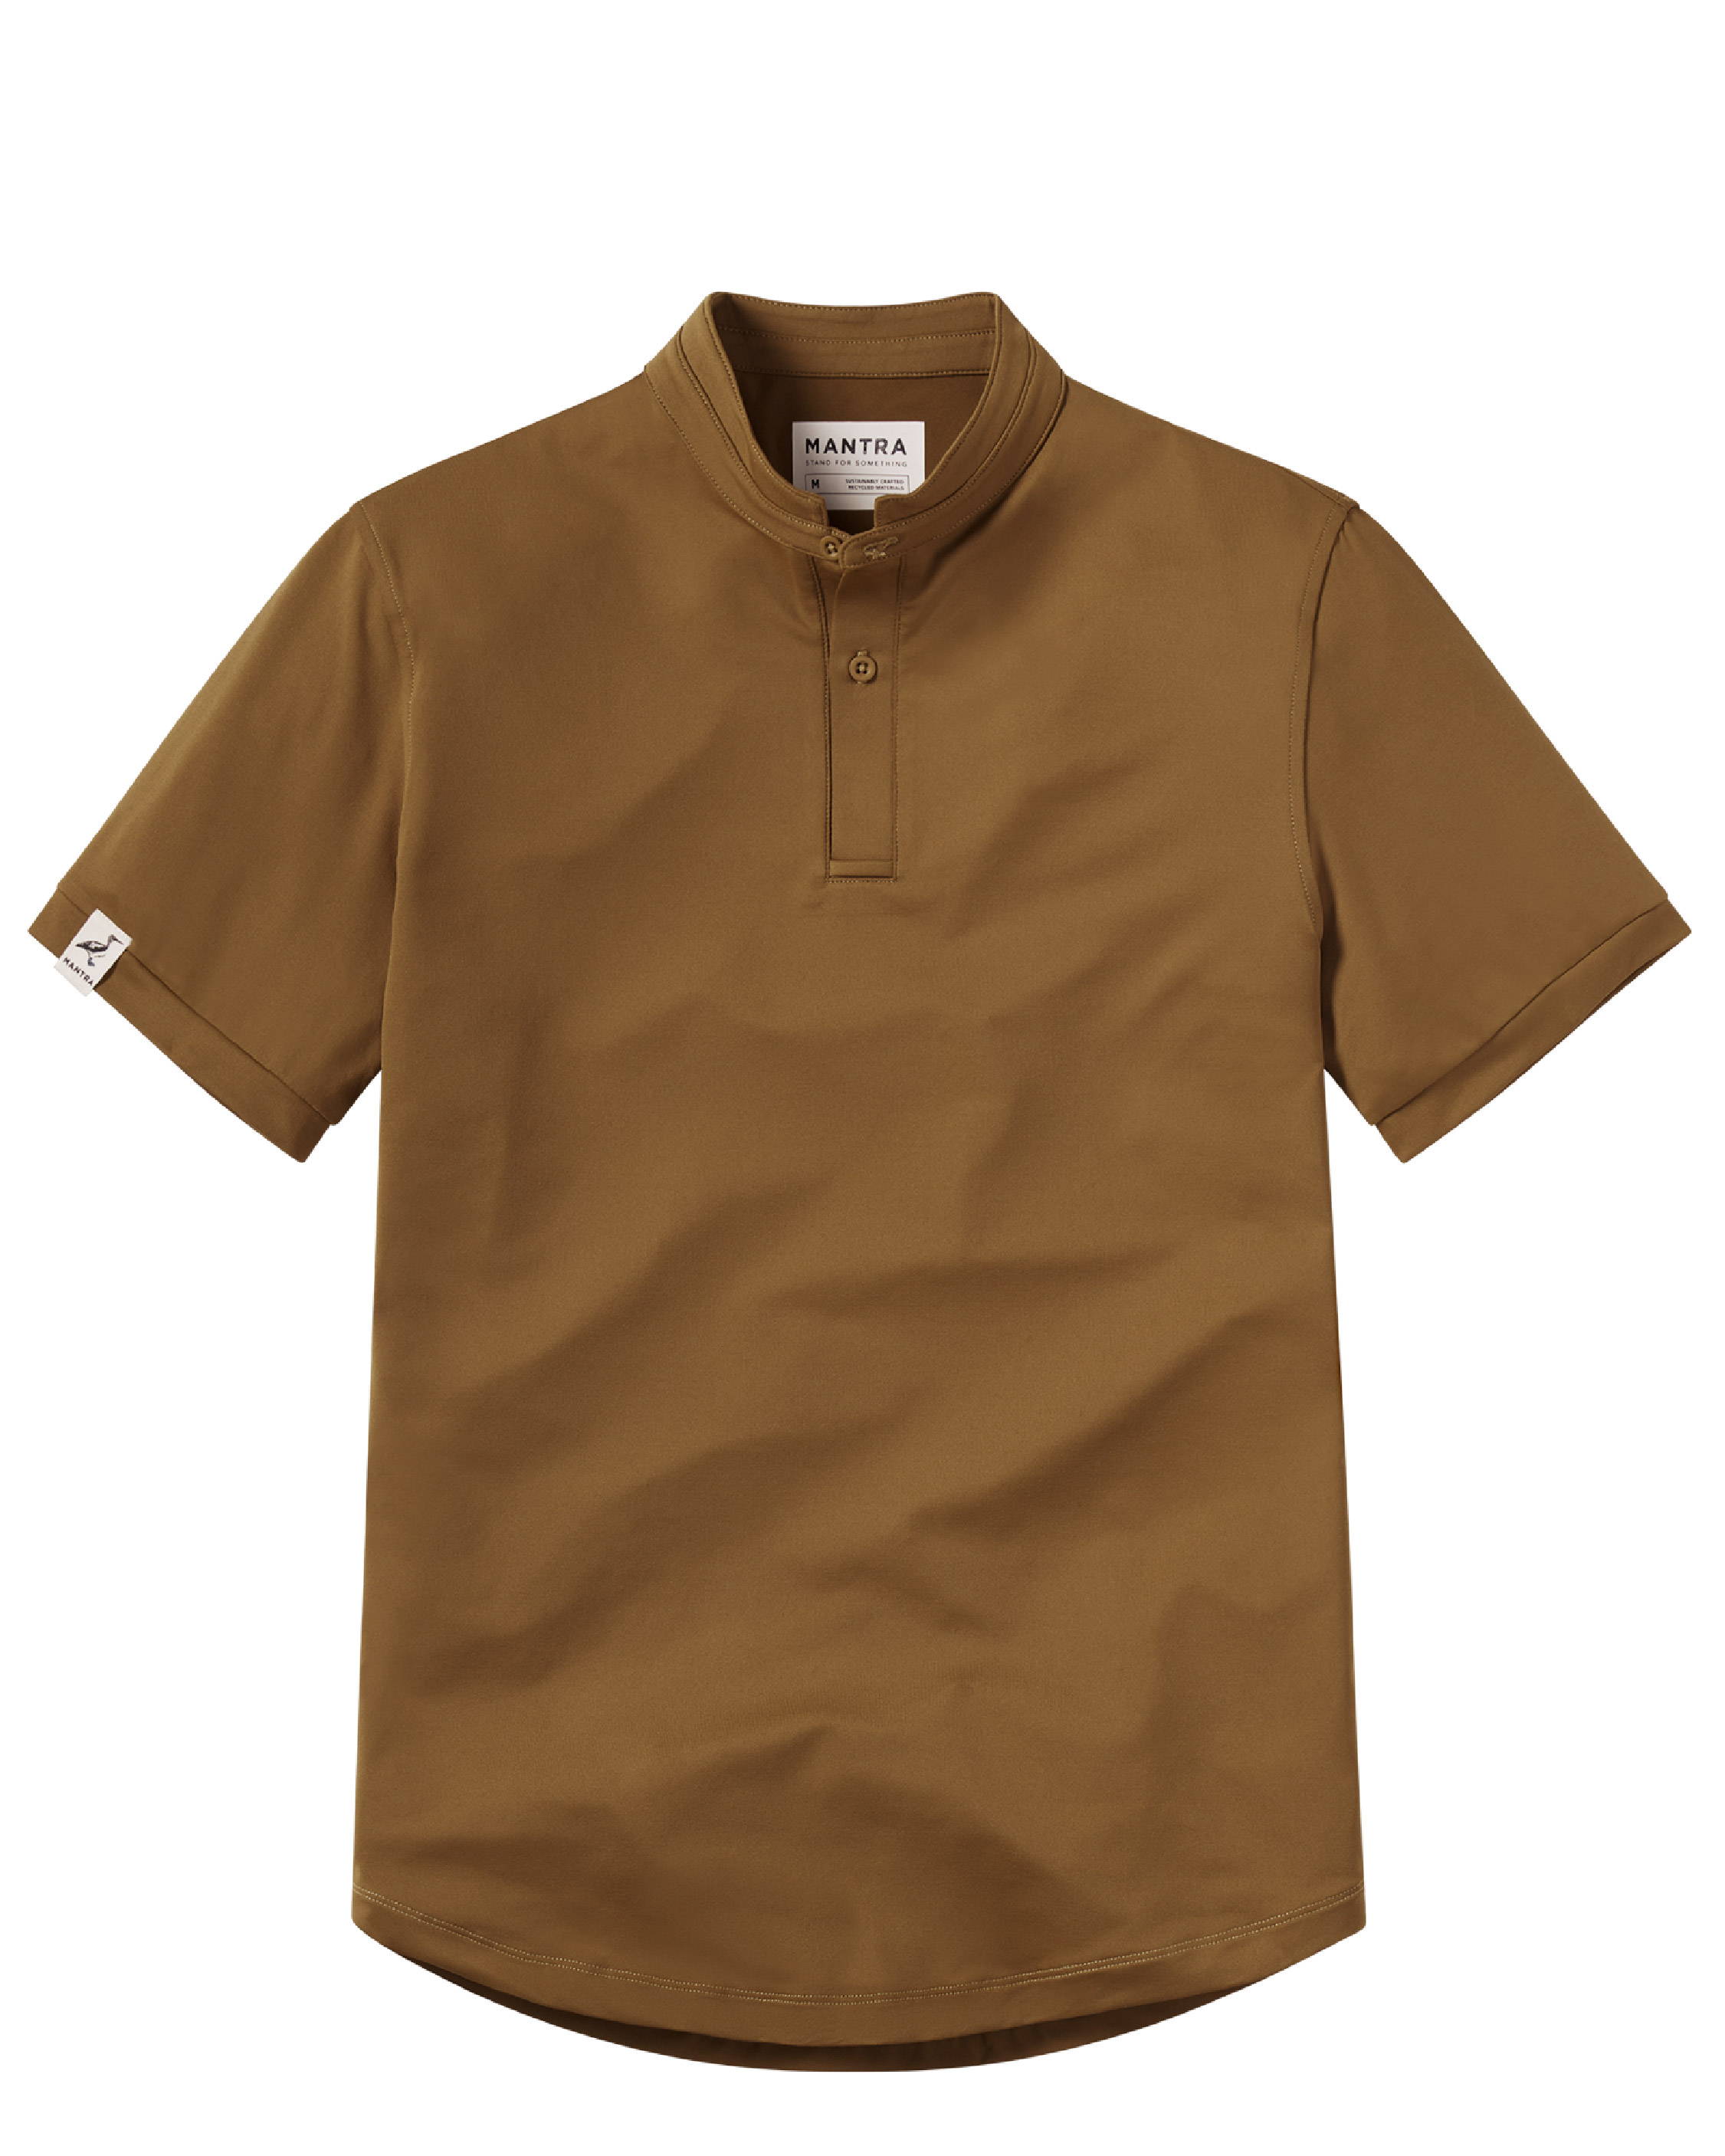 MANTRA BARK Polo - sustainable mens performance polo made from recycled materials